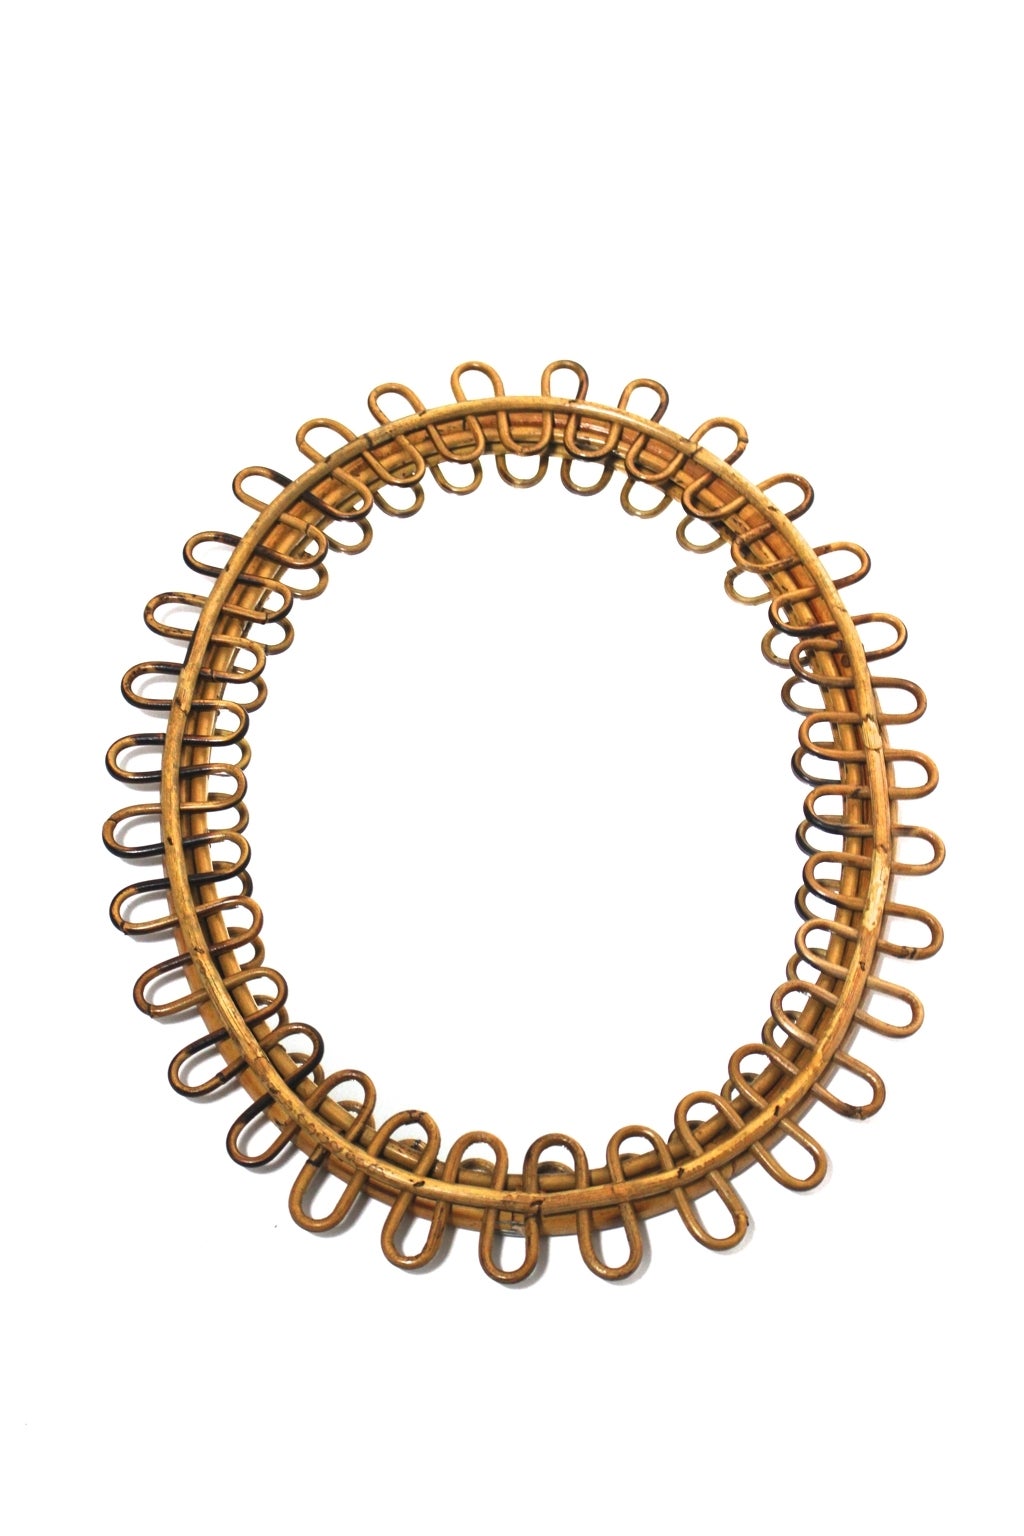 Lovely Rattan Mirror in the style of Jean Royere

Shipping complimentary allover the world